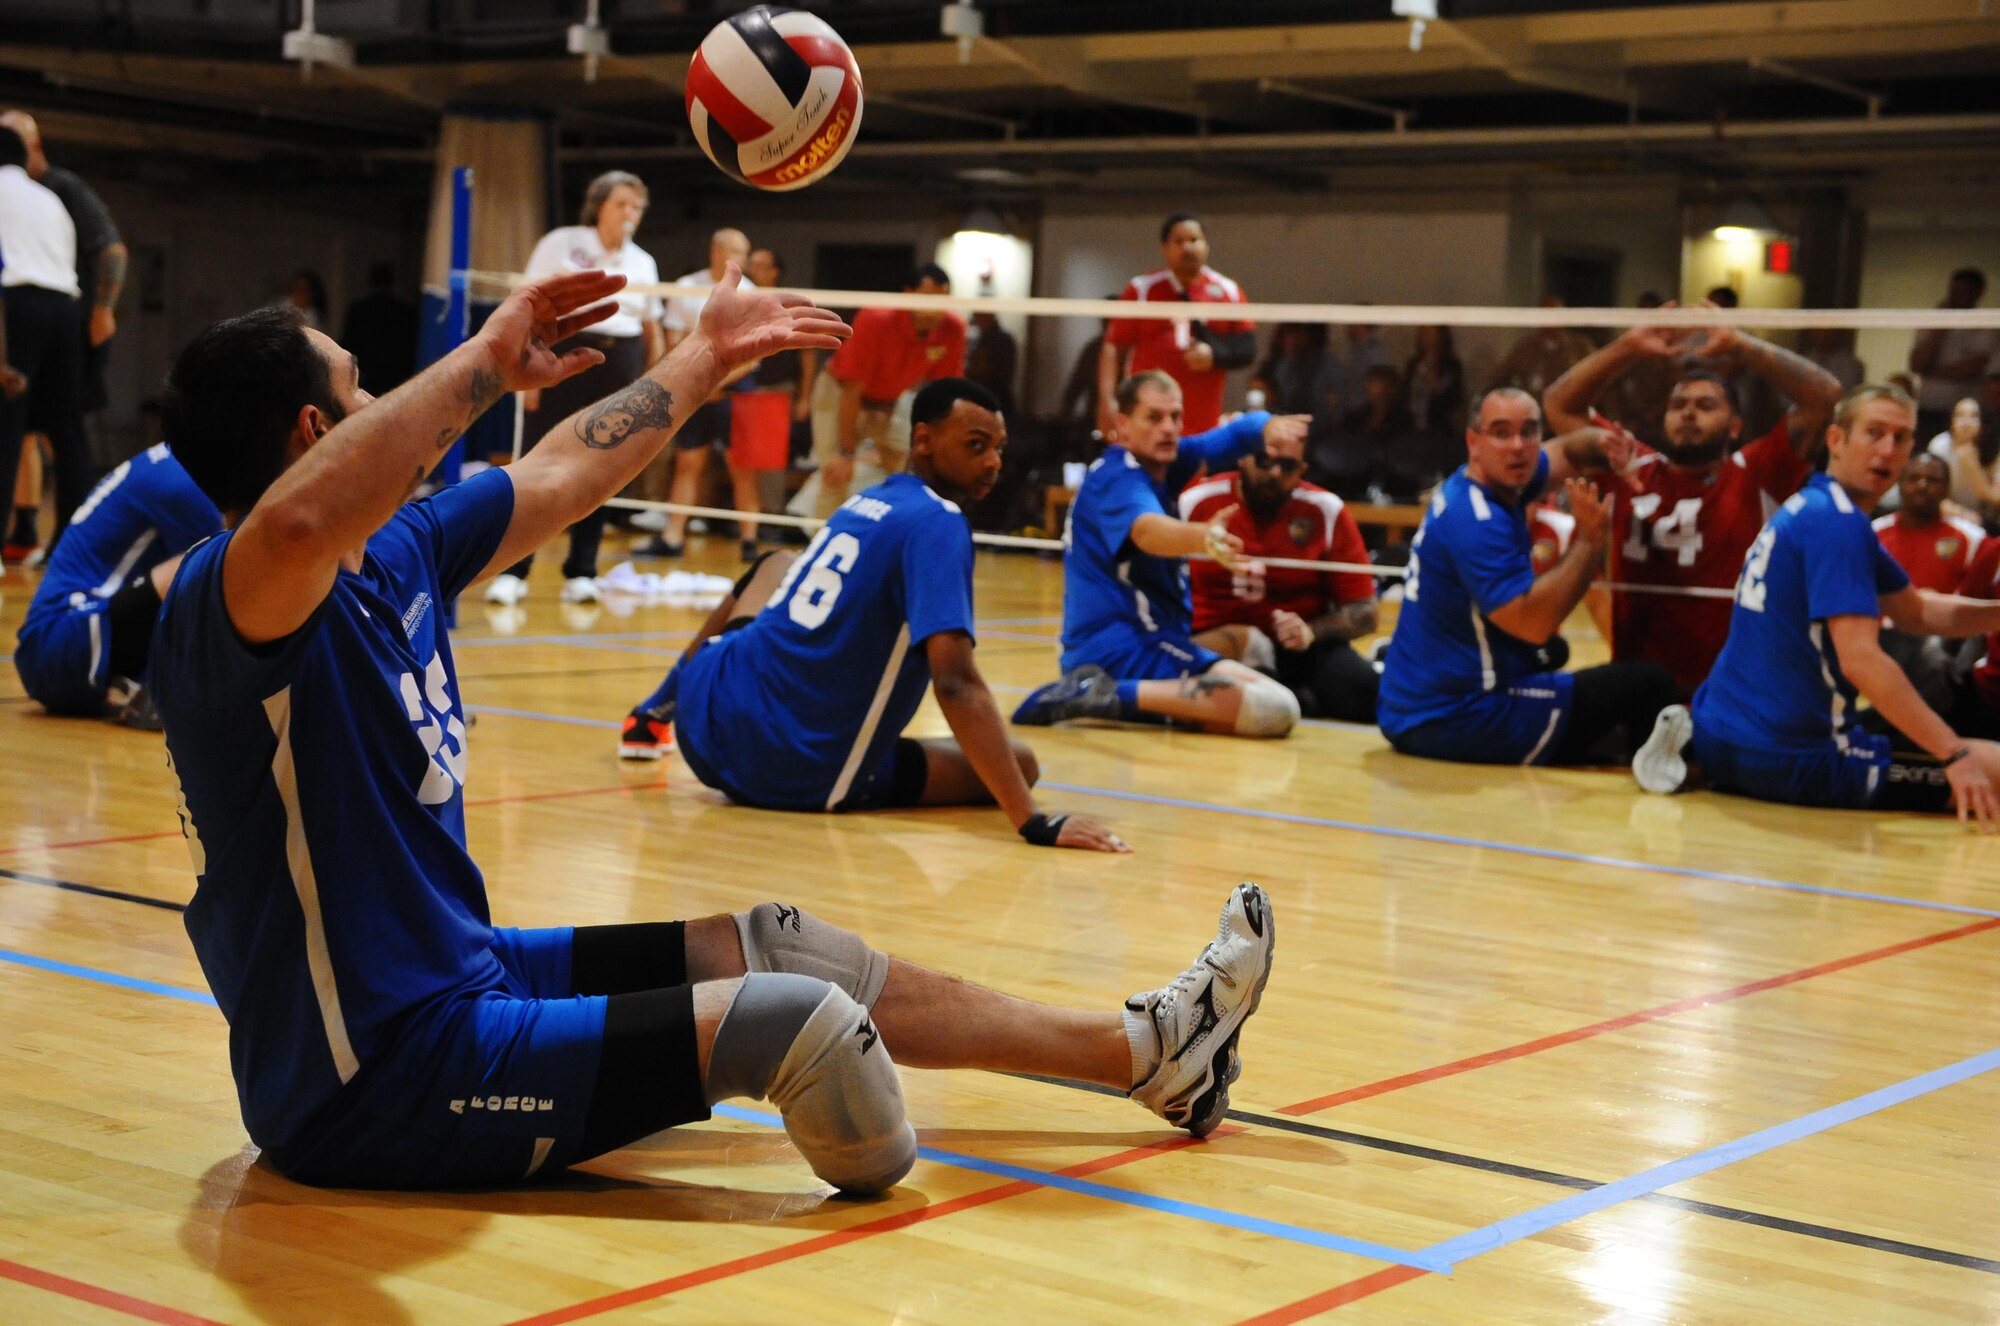 Retired Staff Sgt. Nicholas Dadgostar serves the ball during the Warrior Care Month Sitting Volleyball Tournament championship game at the Pentagon in Washington, D.C., Nov. 19, 2015. The Air Force won the tournament by beating the Marines. (U.S. Air Force photo/Senior Airman Hailey Haux)